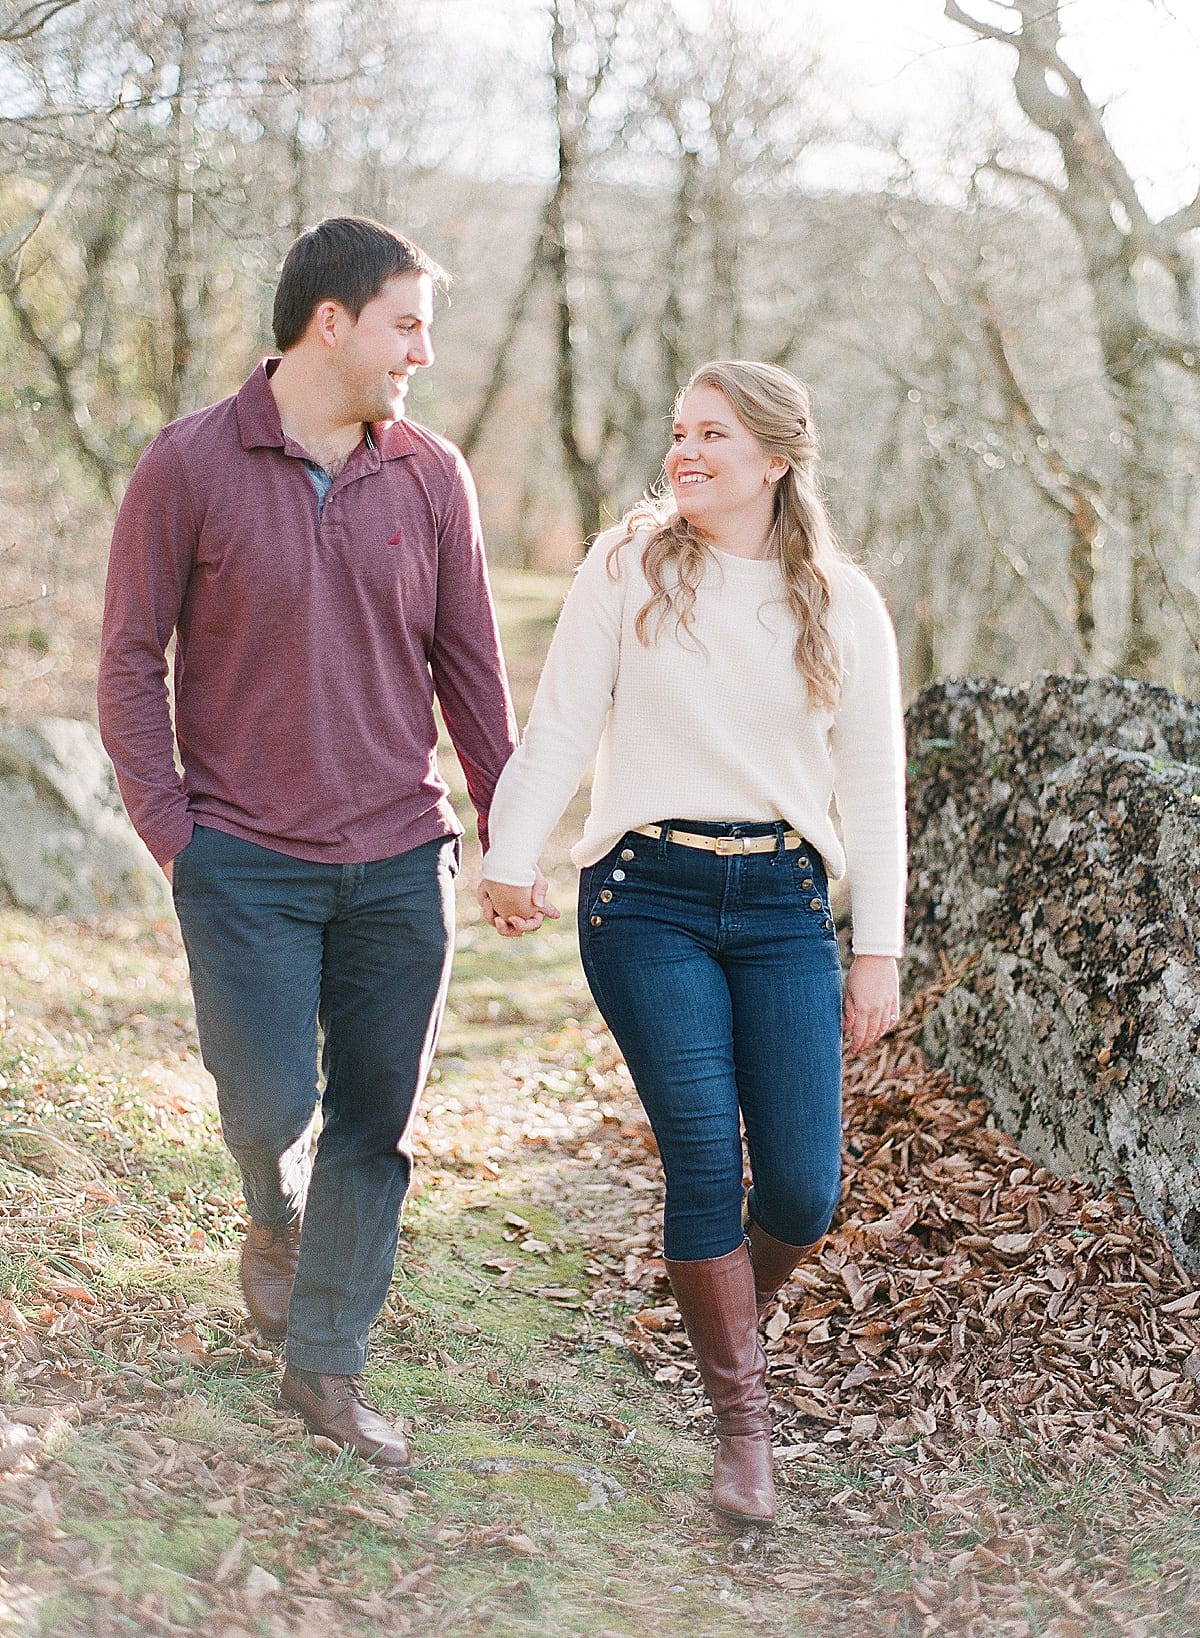 Mountaintop Engagement Session Couple Holding Hands Smiling at Each Other Walking Photo